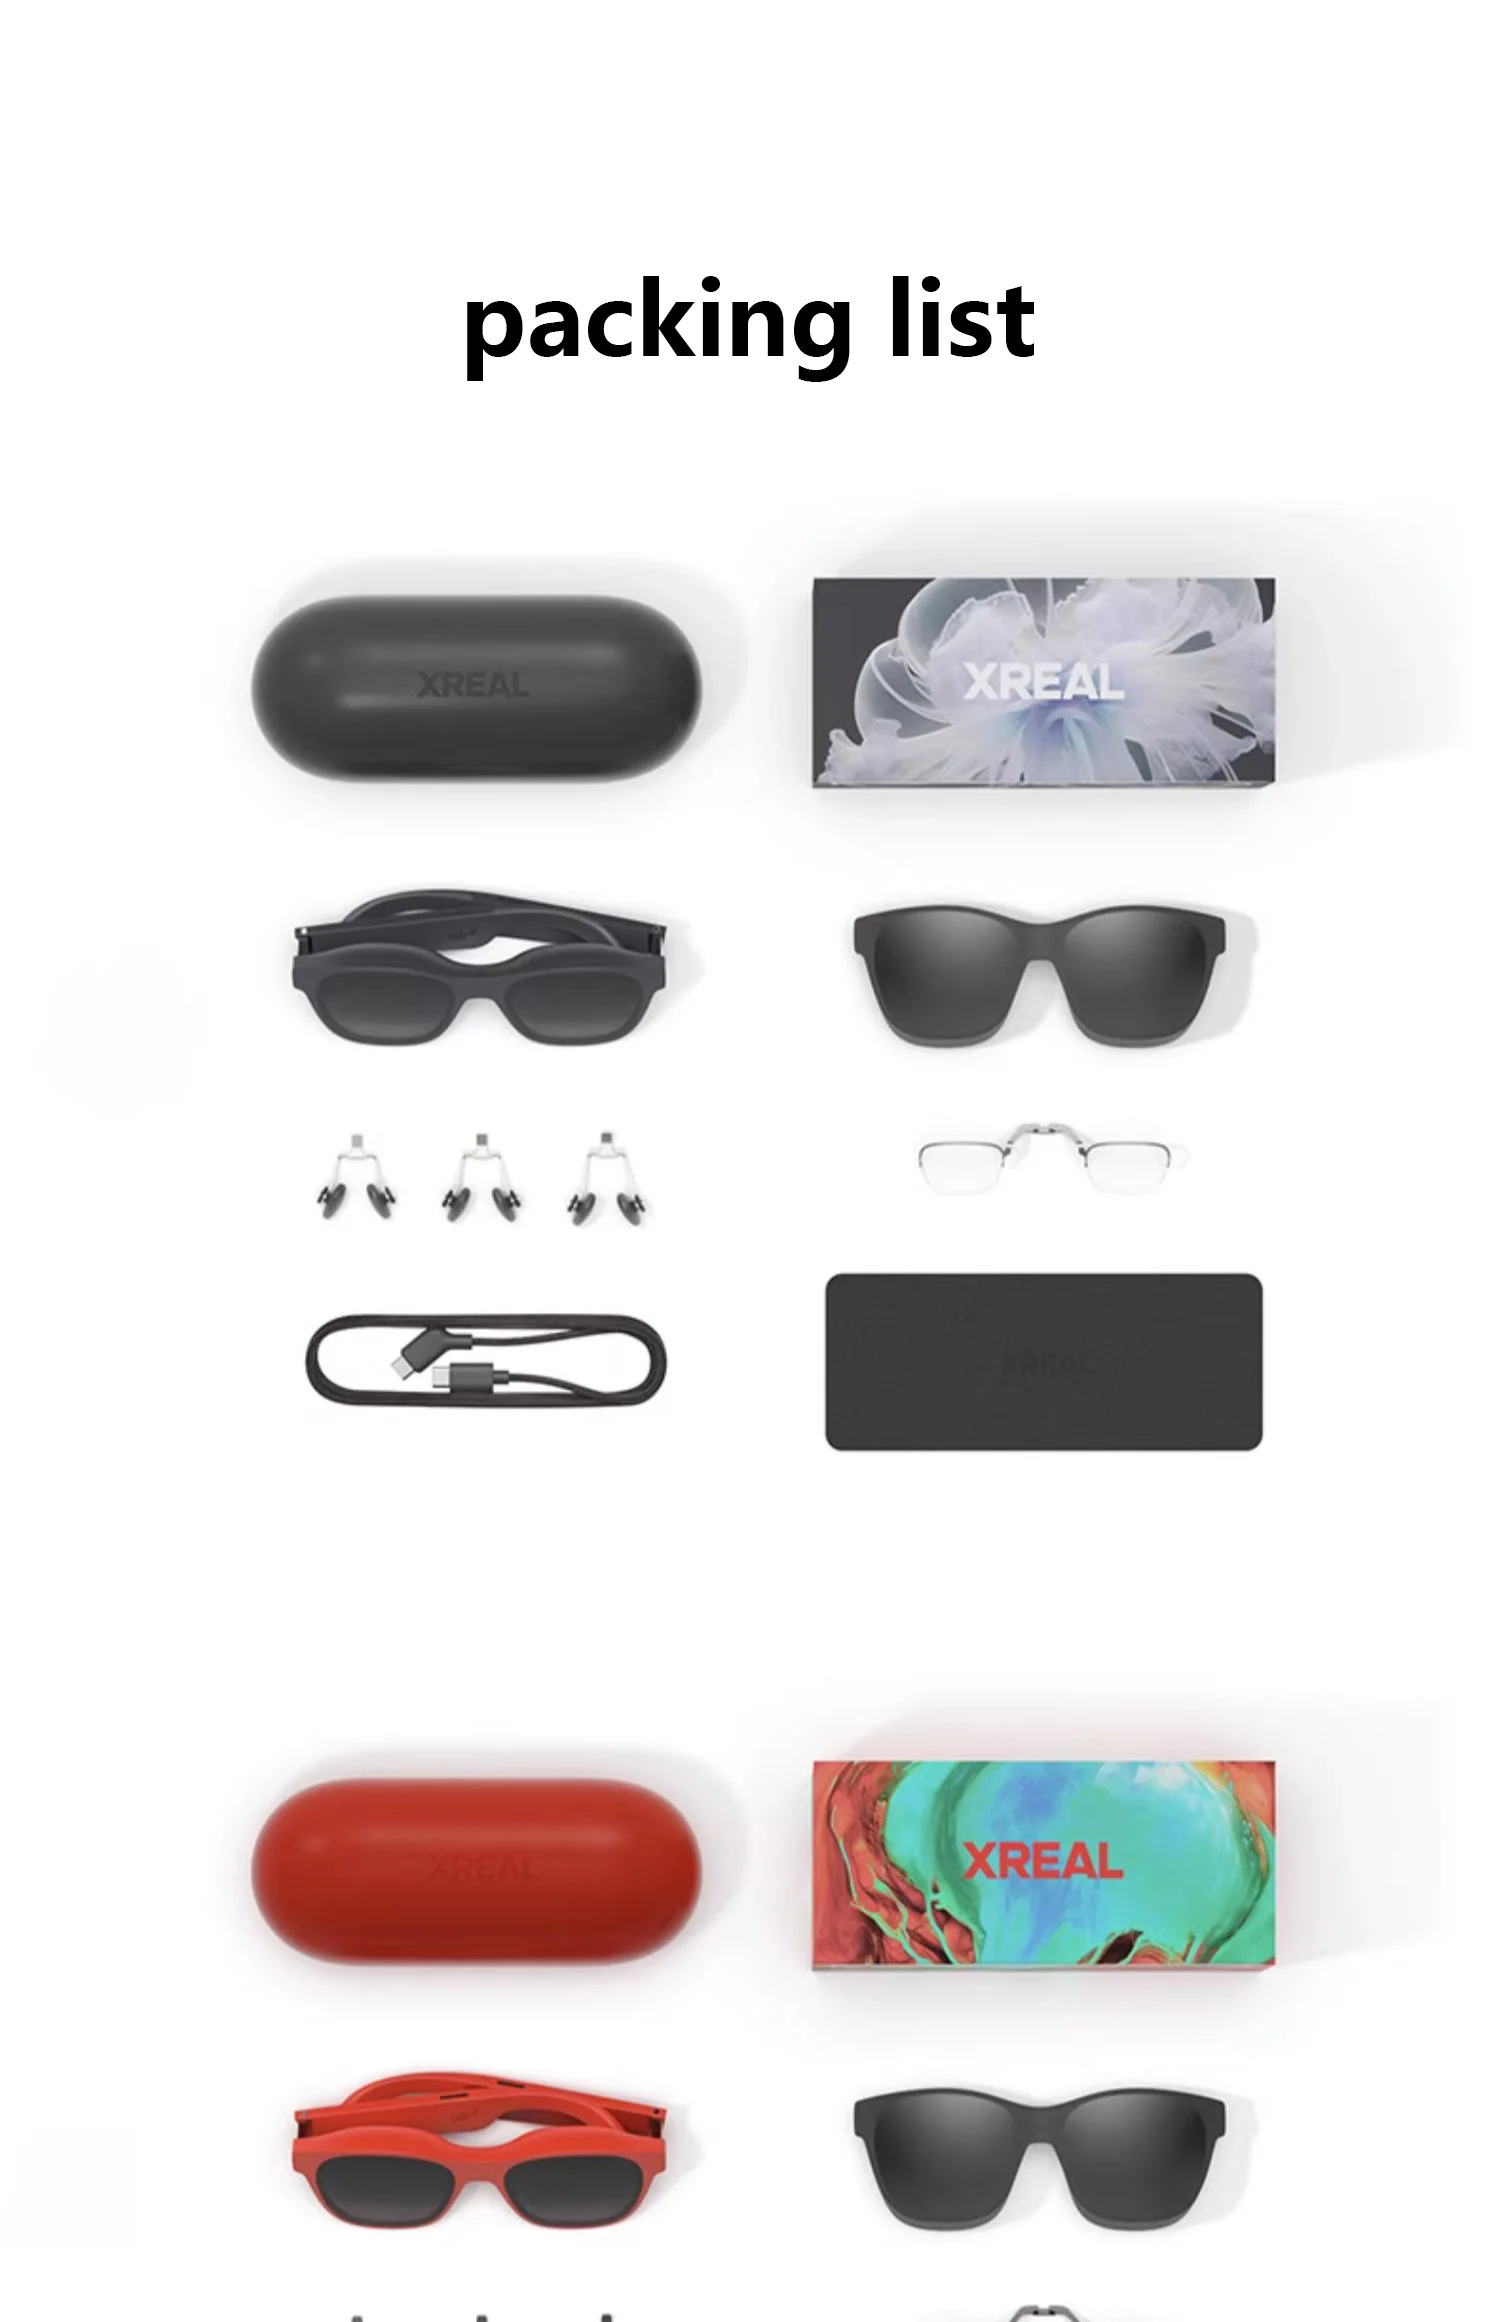 XREAL Air 2 AR Glasses, Up to 330 Wearable Display with All-Day Comfort,  72g 120Hz 1080P, Ideal for Gaming, Streaming and Working, Smart Glasses